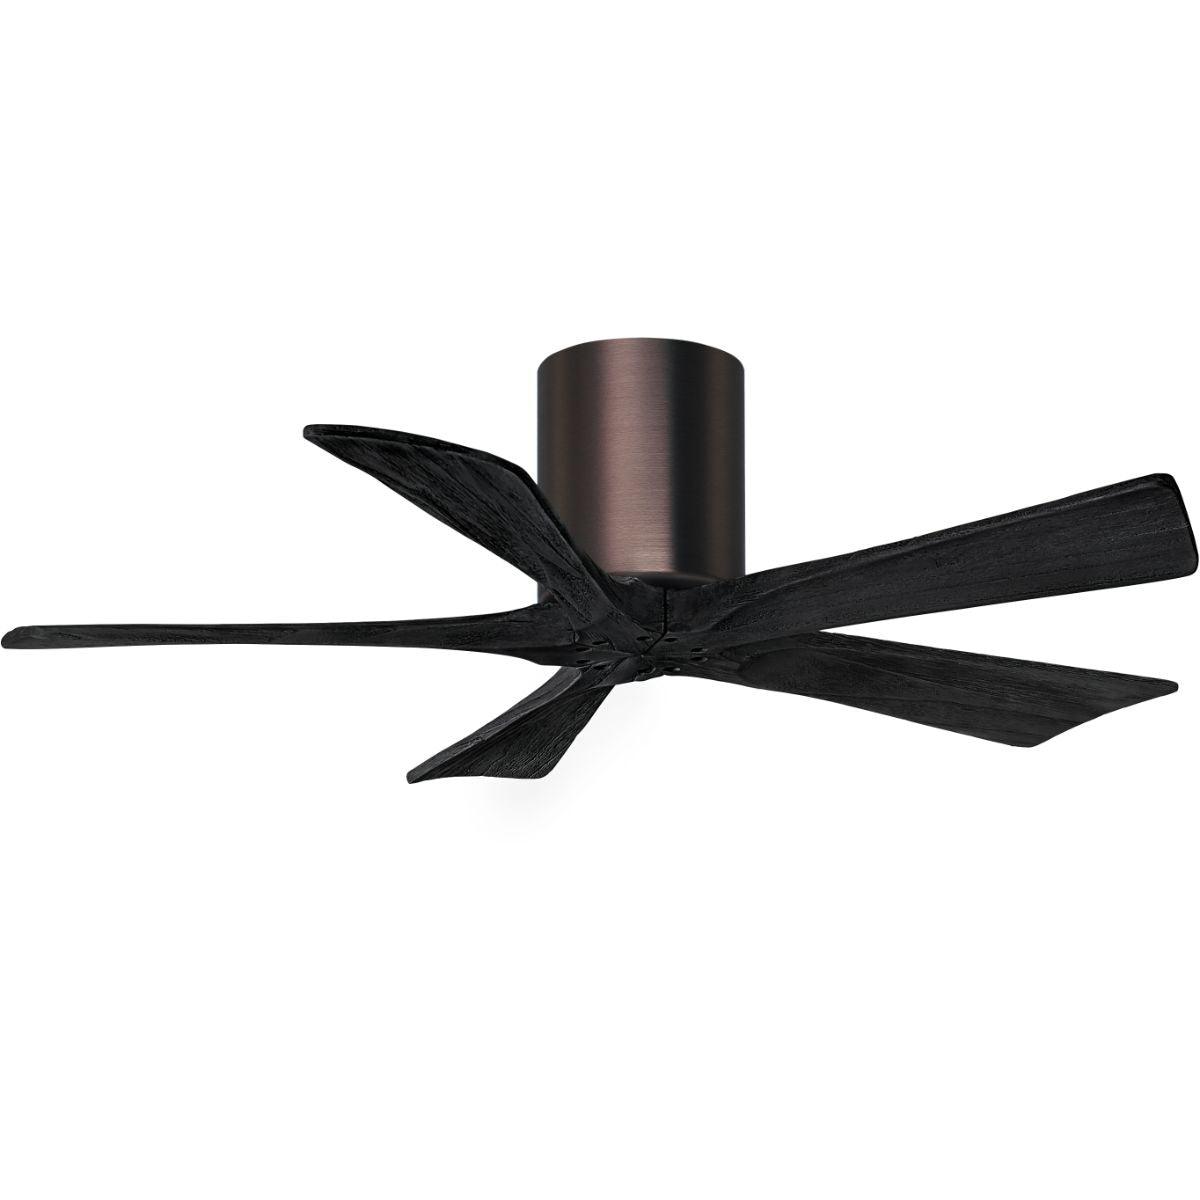 Irene 42 Inch 5 Blades Outdoor Low Profile Ceiling Fan With Remote And Wall Control